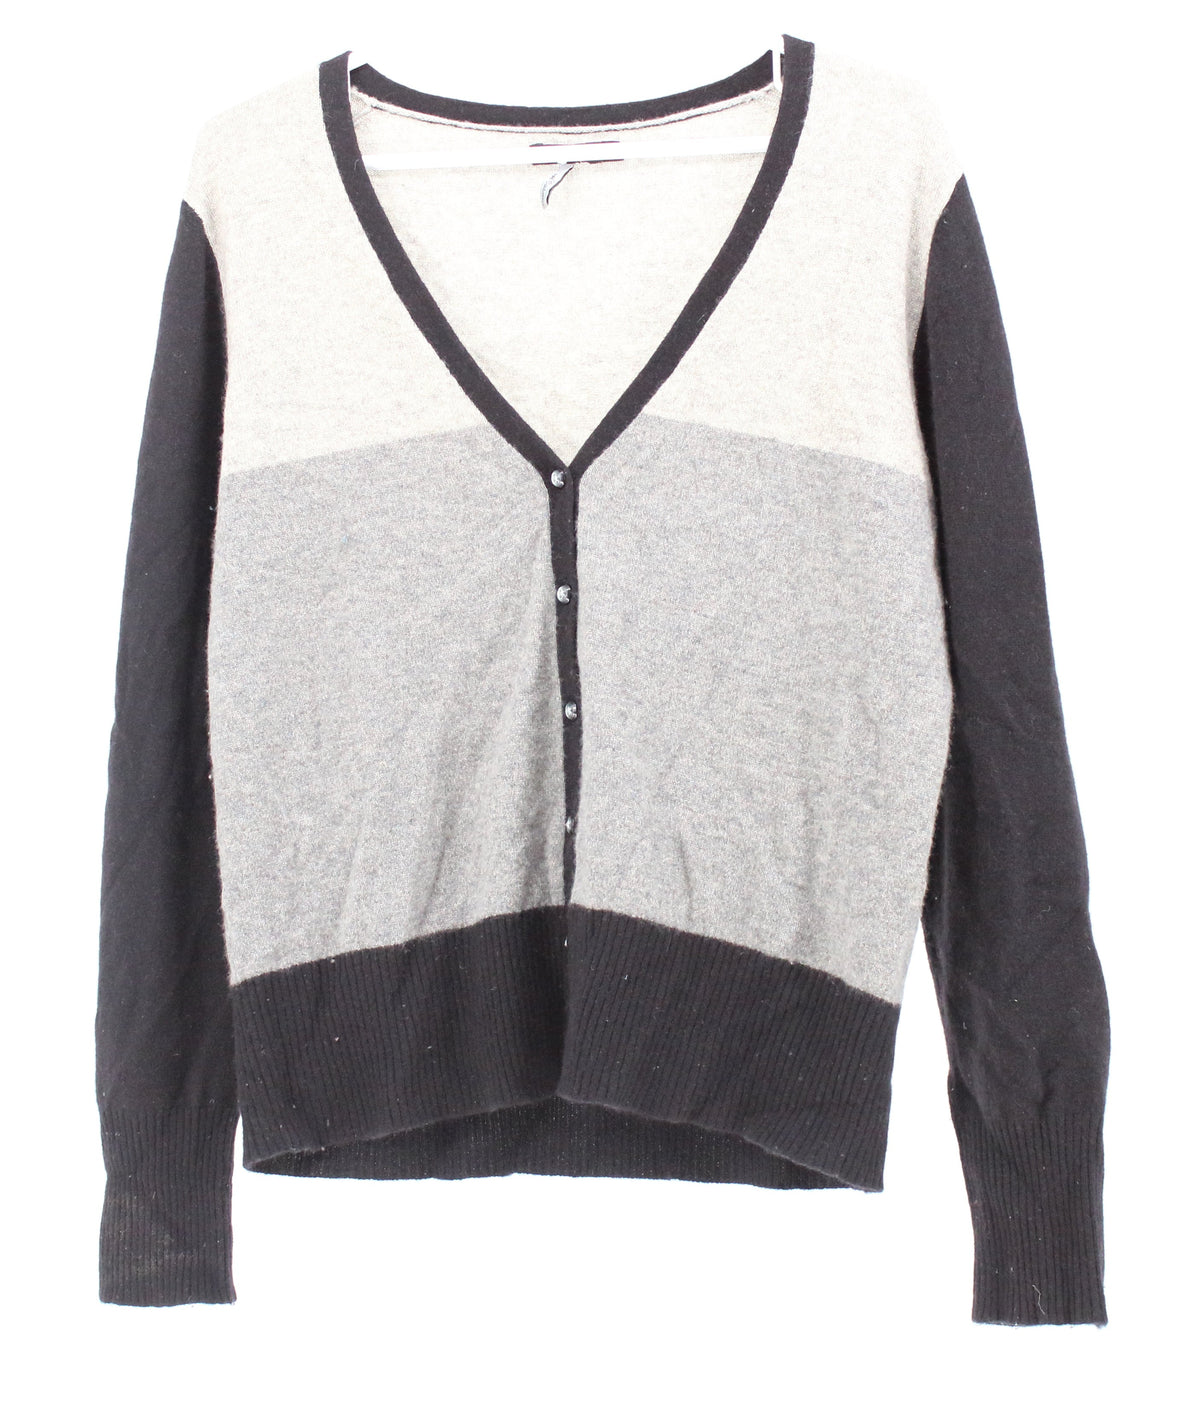 Apt.9 Grey And Black Buttoned Cashmere Cardigan Sweater